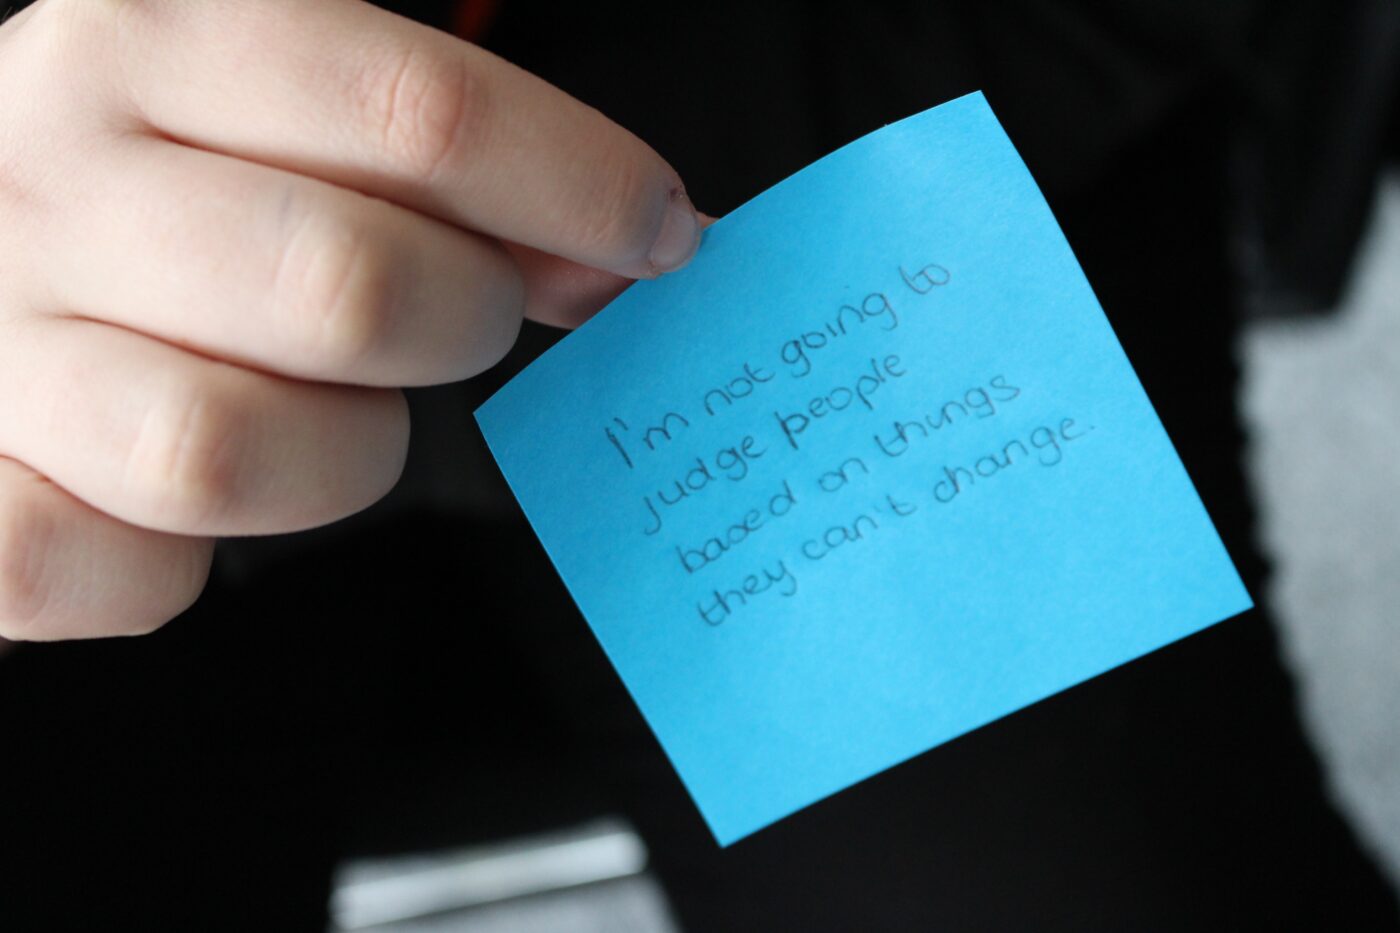 Written on a post-it note are the words I'm not going to judge people based on things they can't change.